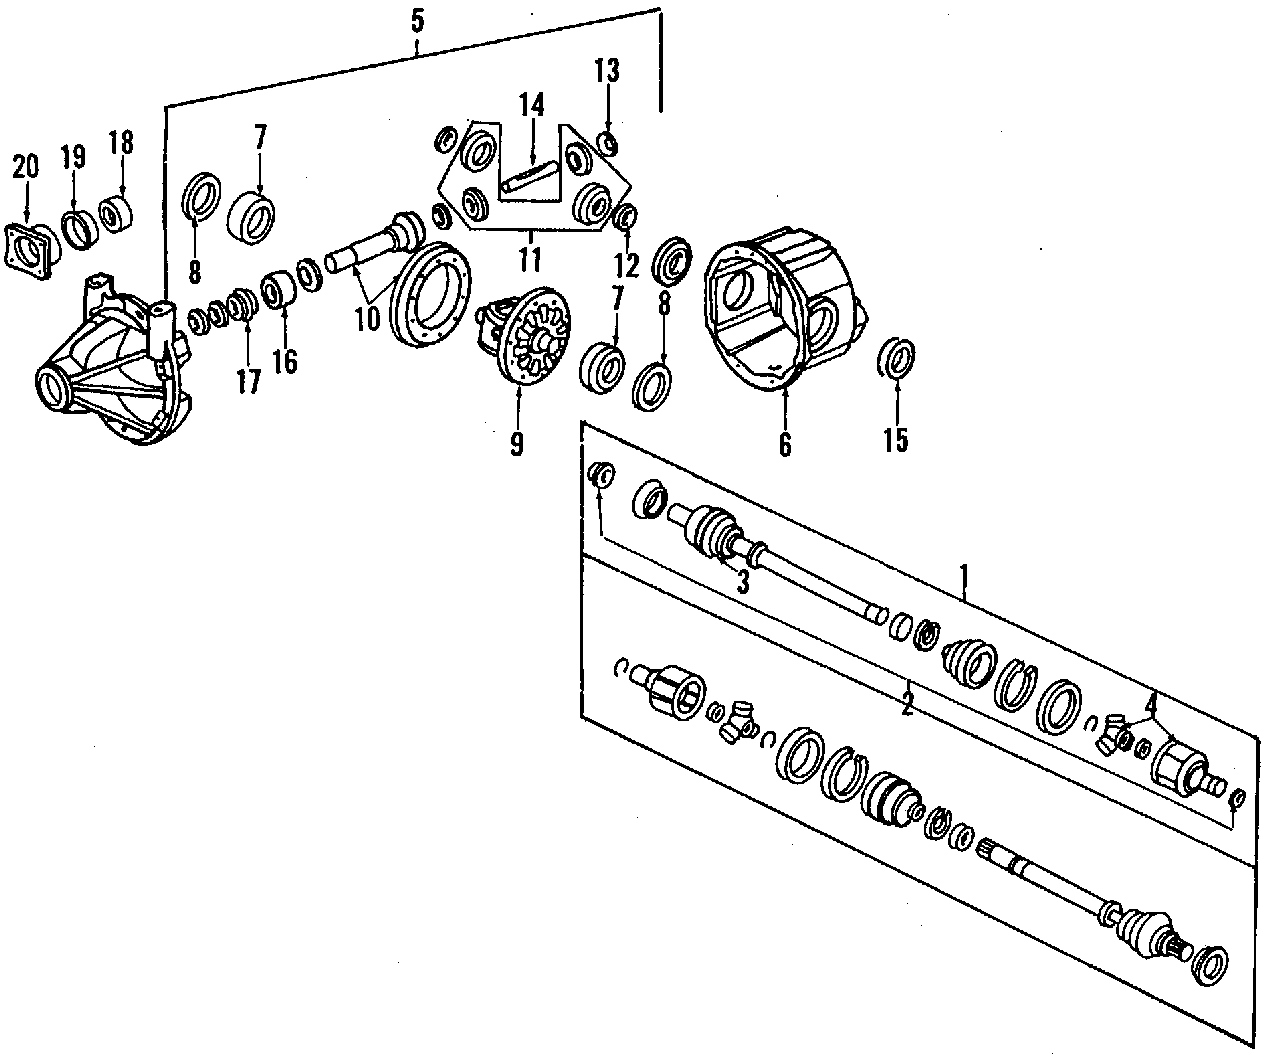 12REAR AXLE. AXLE SHAFTS & JOINTS. DIFFERENTIAL. PROPELLER SHAFT.https://images.simplepart.com/images/parts/motor/fullsize/F640360.png